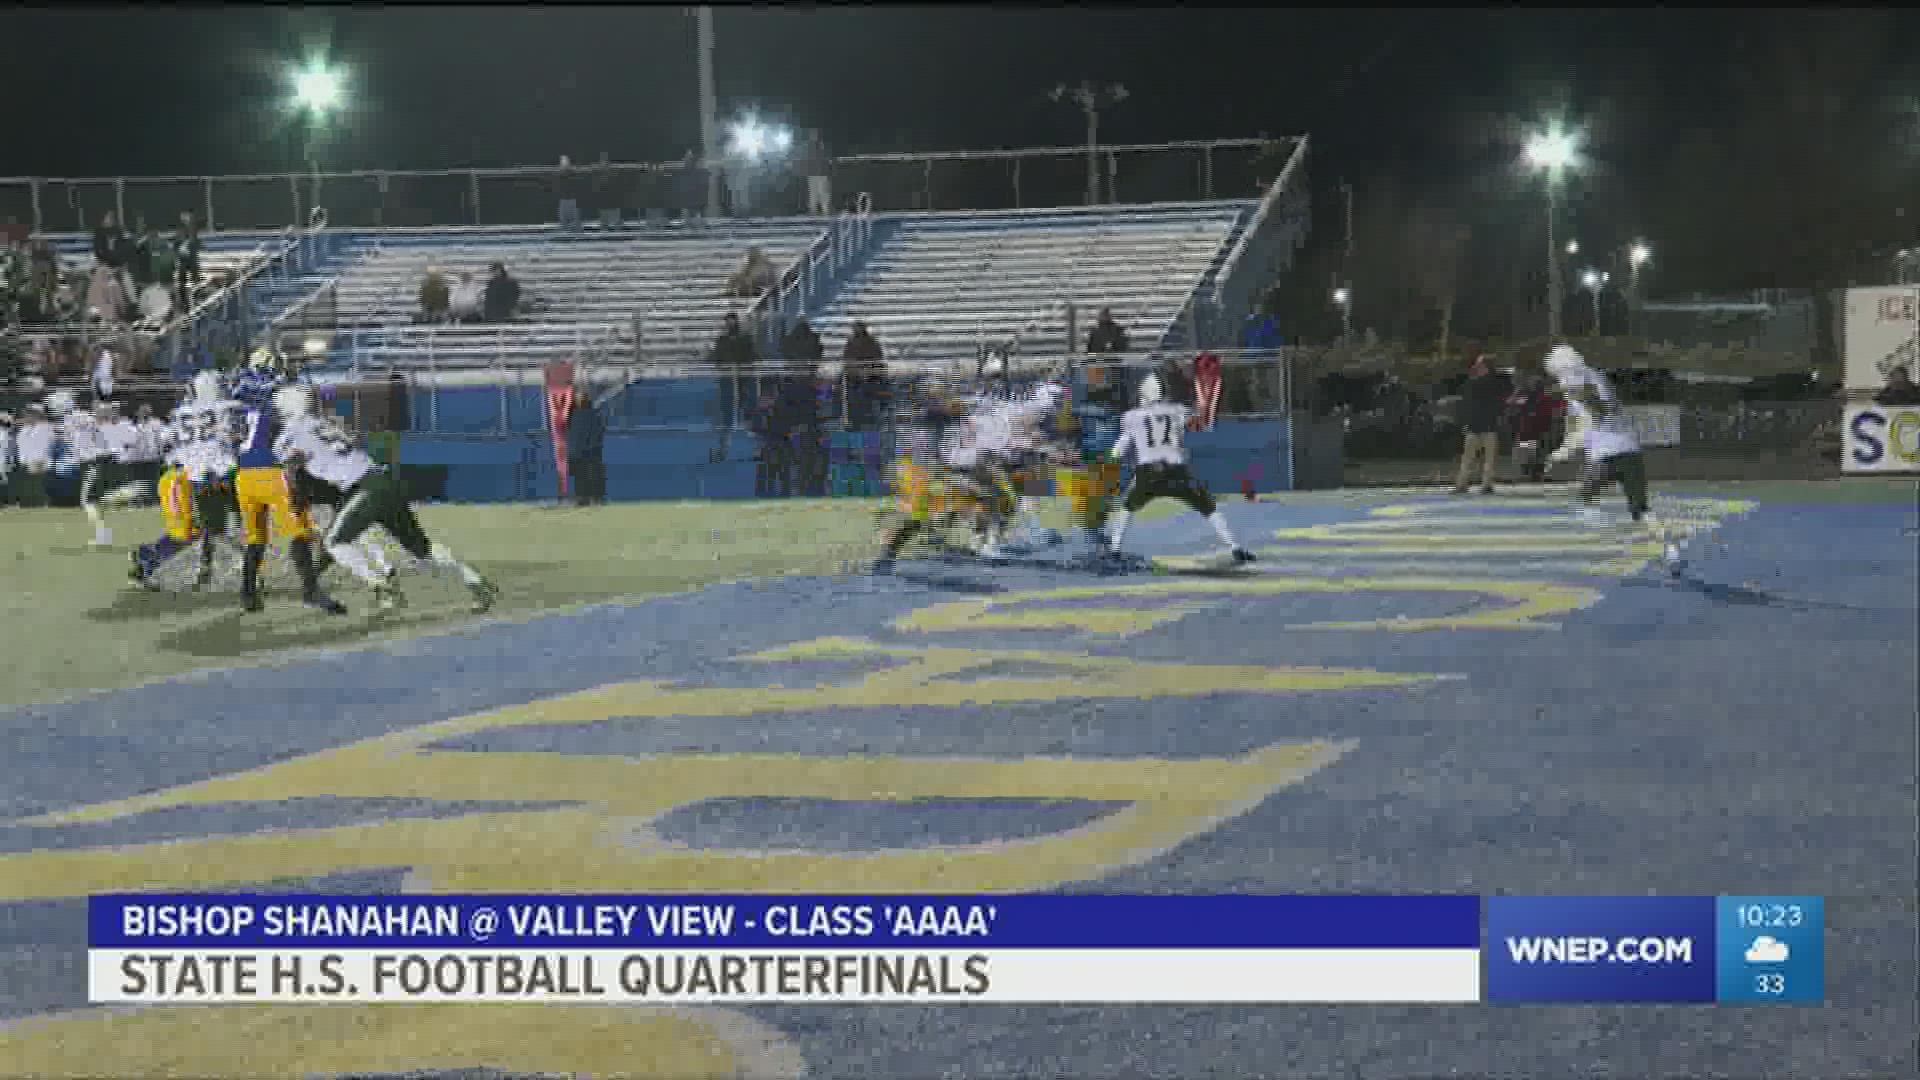 Valley View battled to the finish but had their season end with a 35-25 loss to Bishop Shanahan.